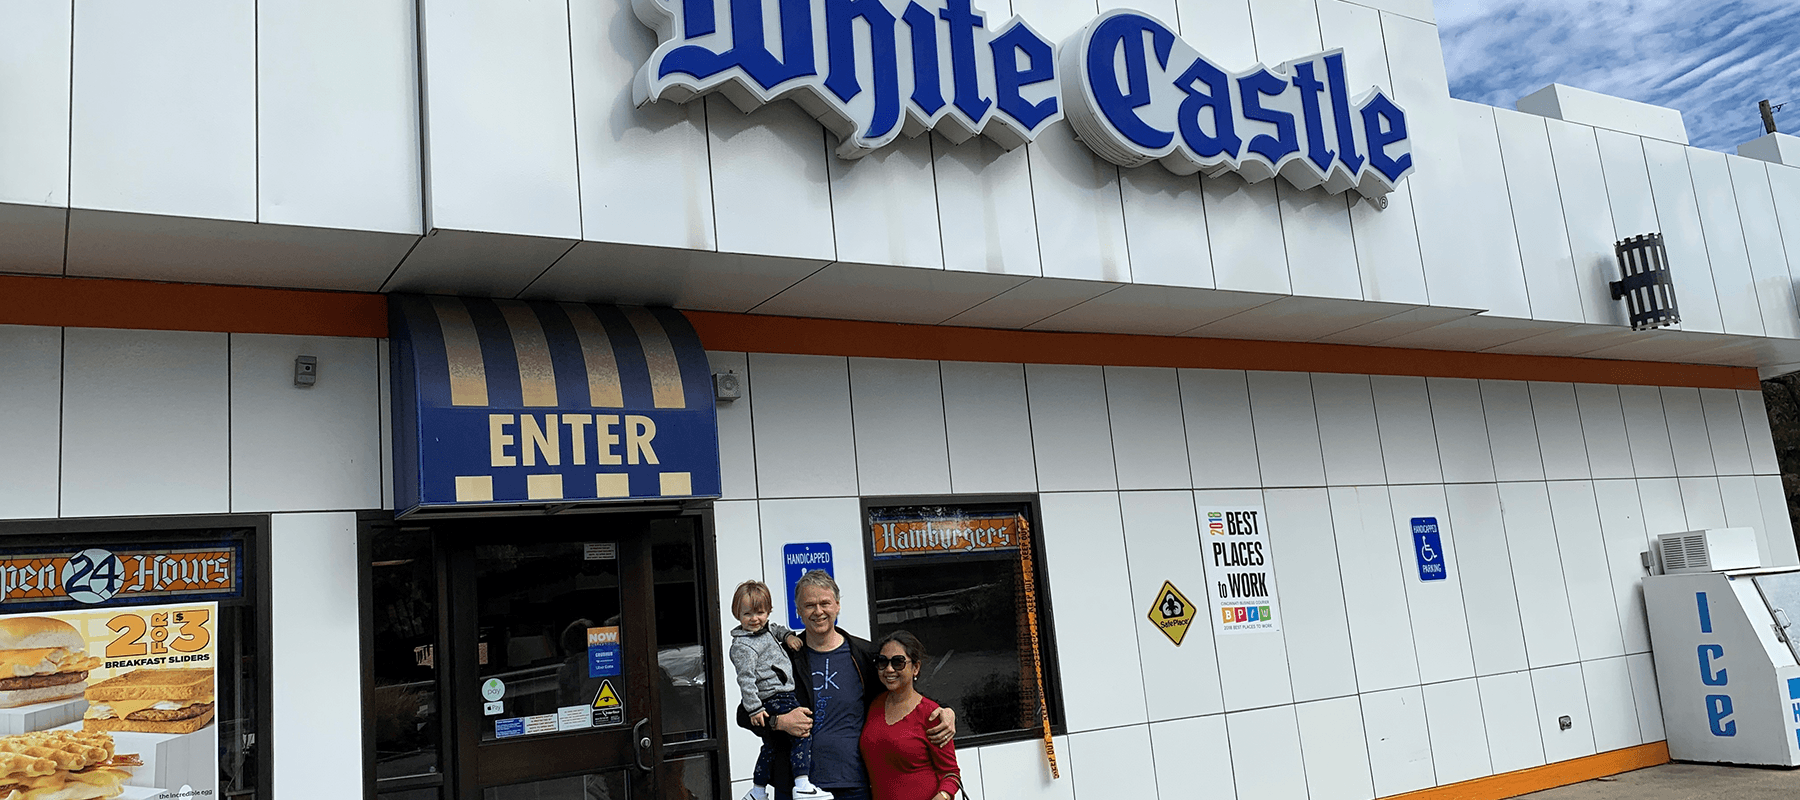 Meeting Harold and Kumar at White Castle - Mini Vacation For Greg & Chen :) - Signa